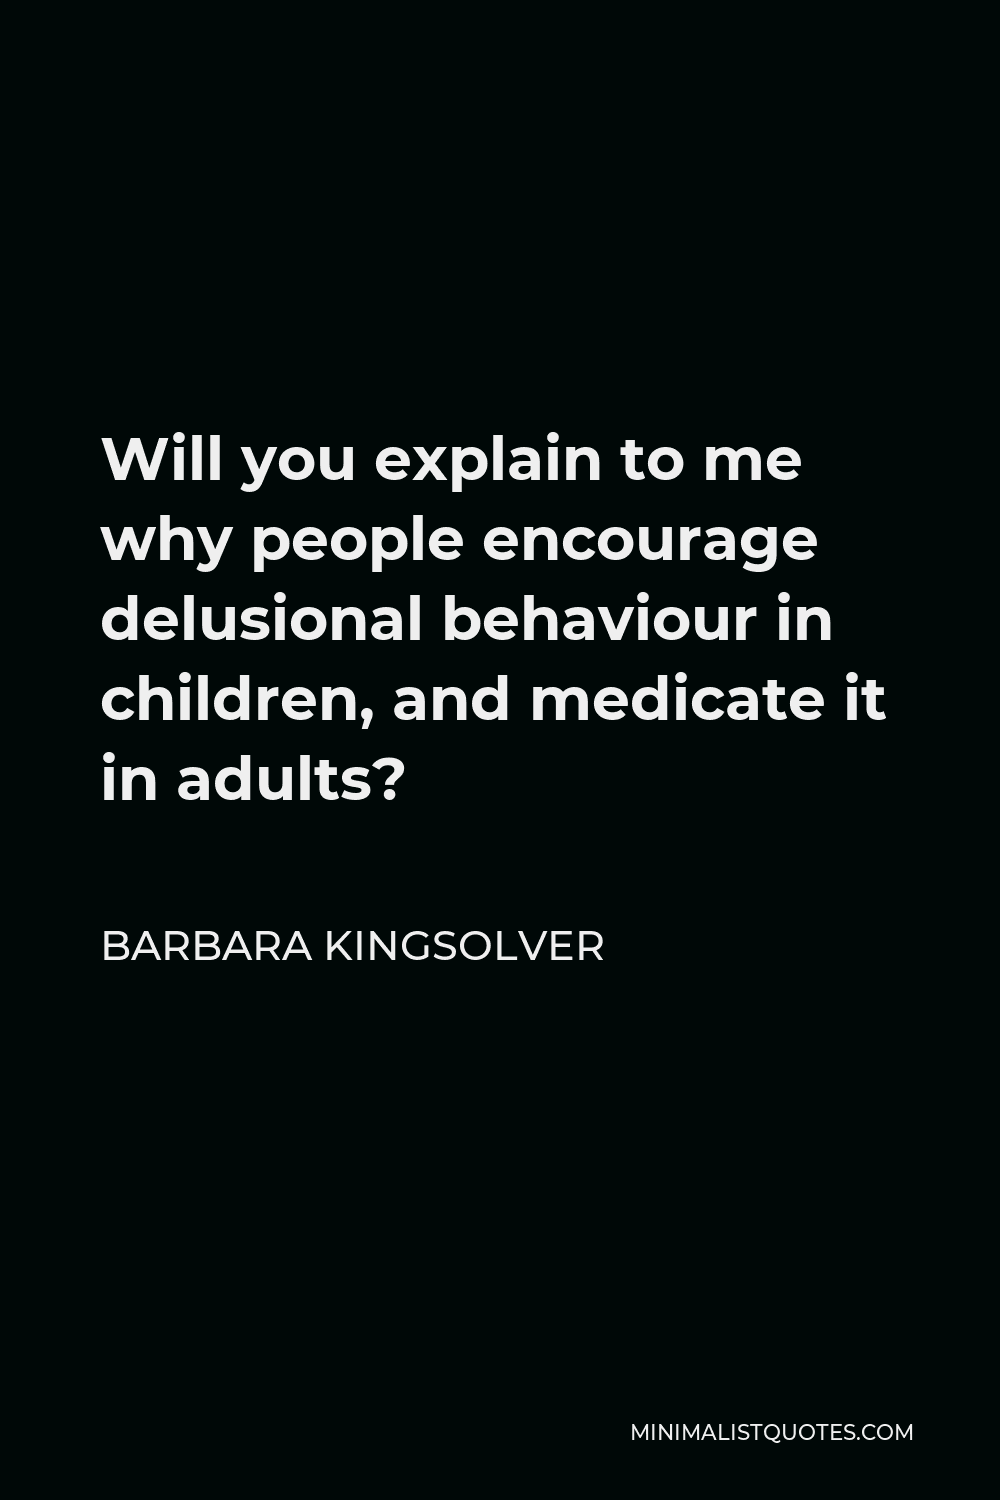 Barbara Kingsolver Quote - Will you explain to me why people encourage delusional behaviour in children, and medicate it in adults?